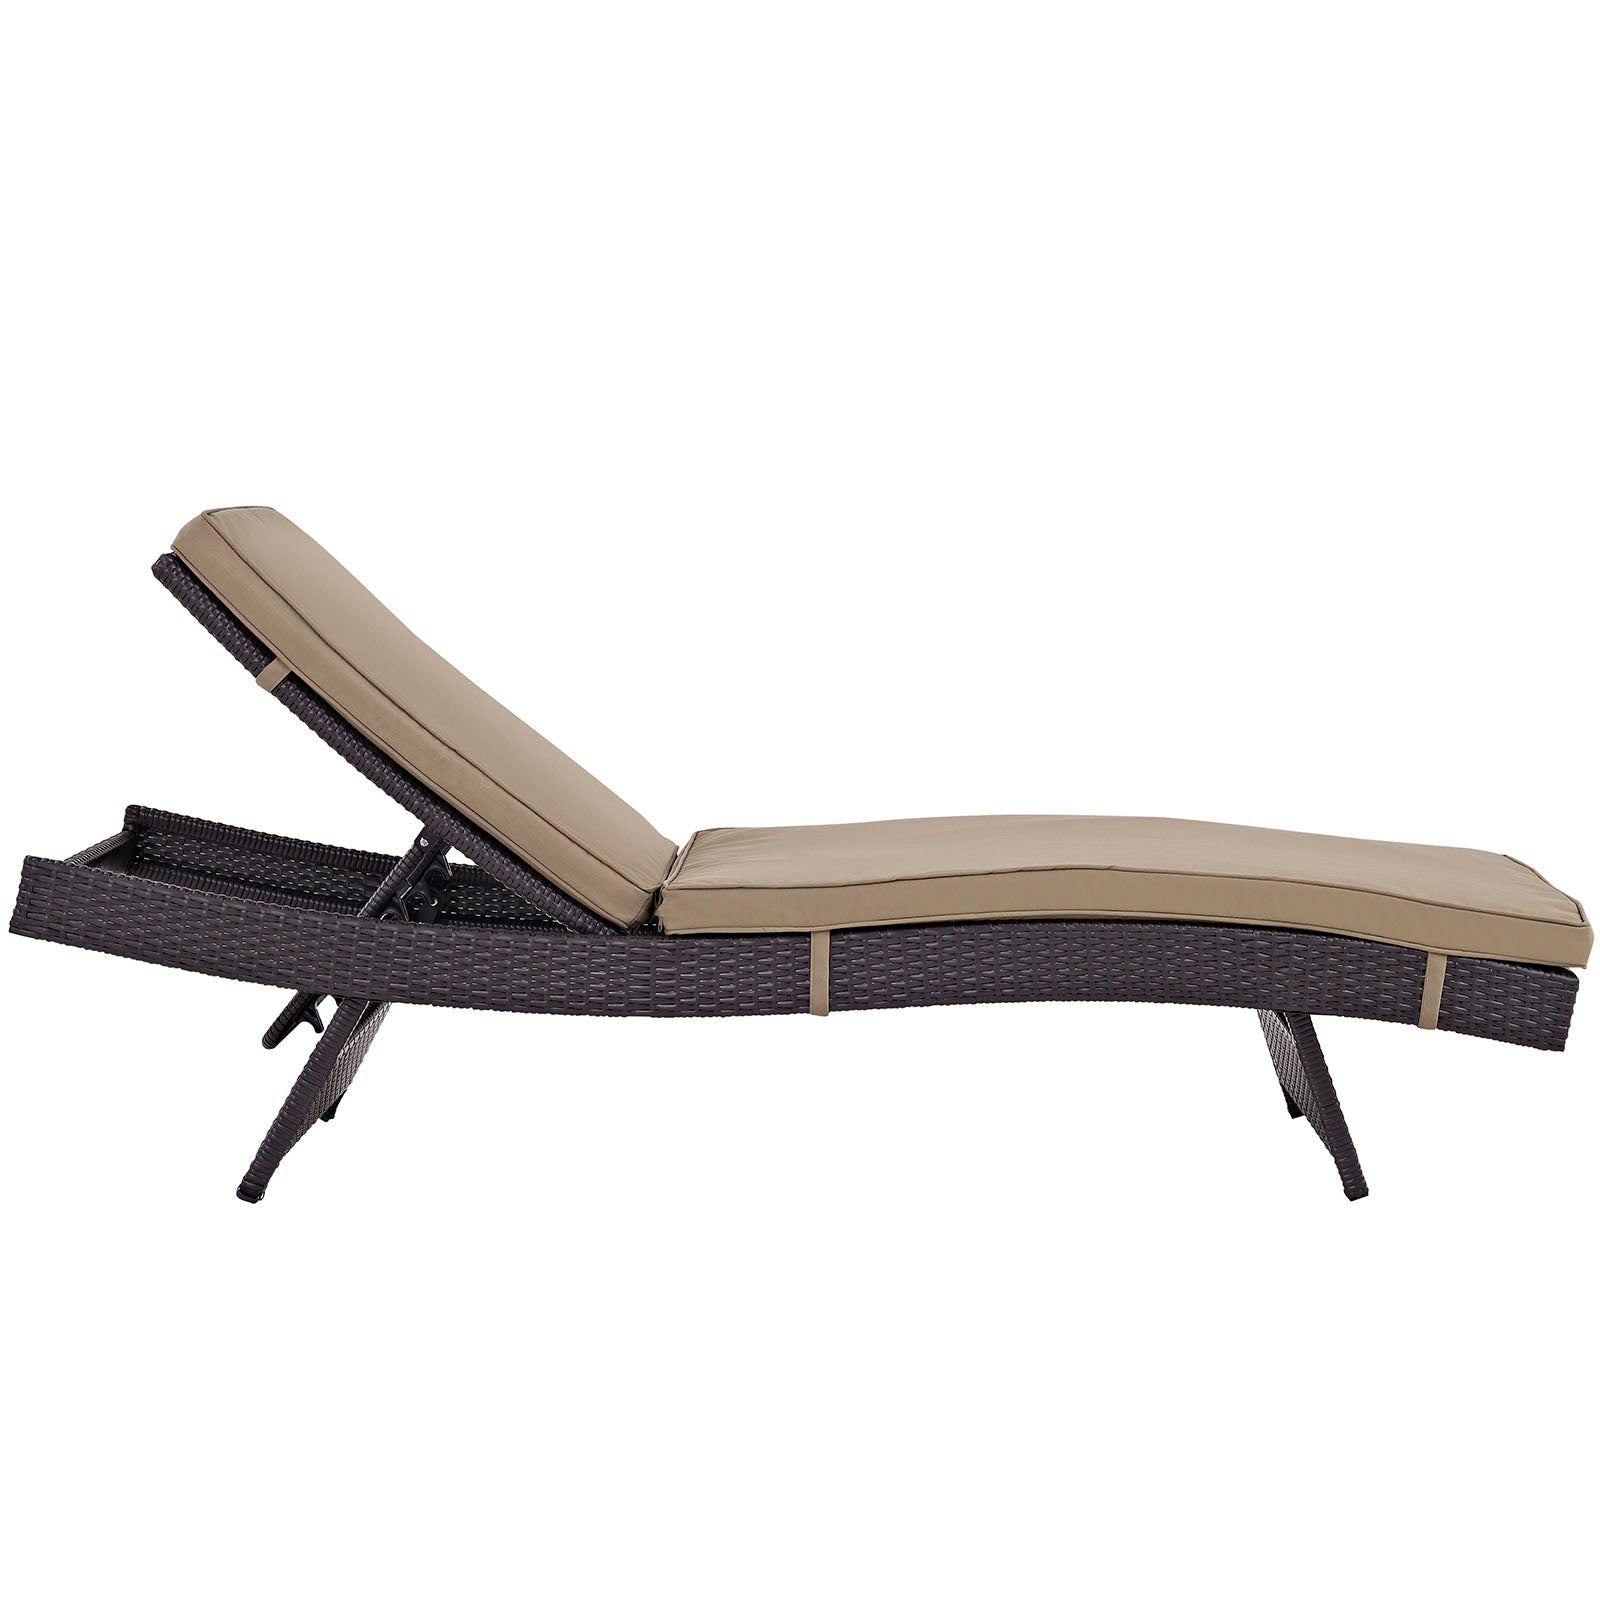 Modway Outdoor Loungers - Convene Chaise Outdoor Patio Espresso & Mocha (Set Of 4)